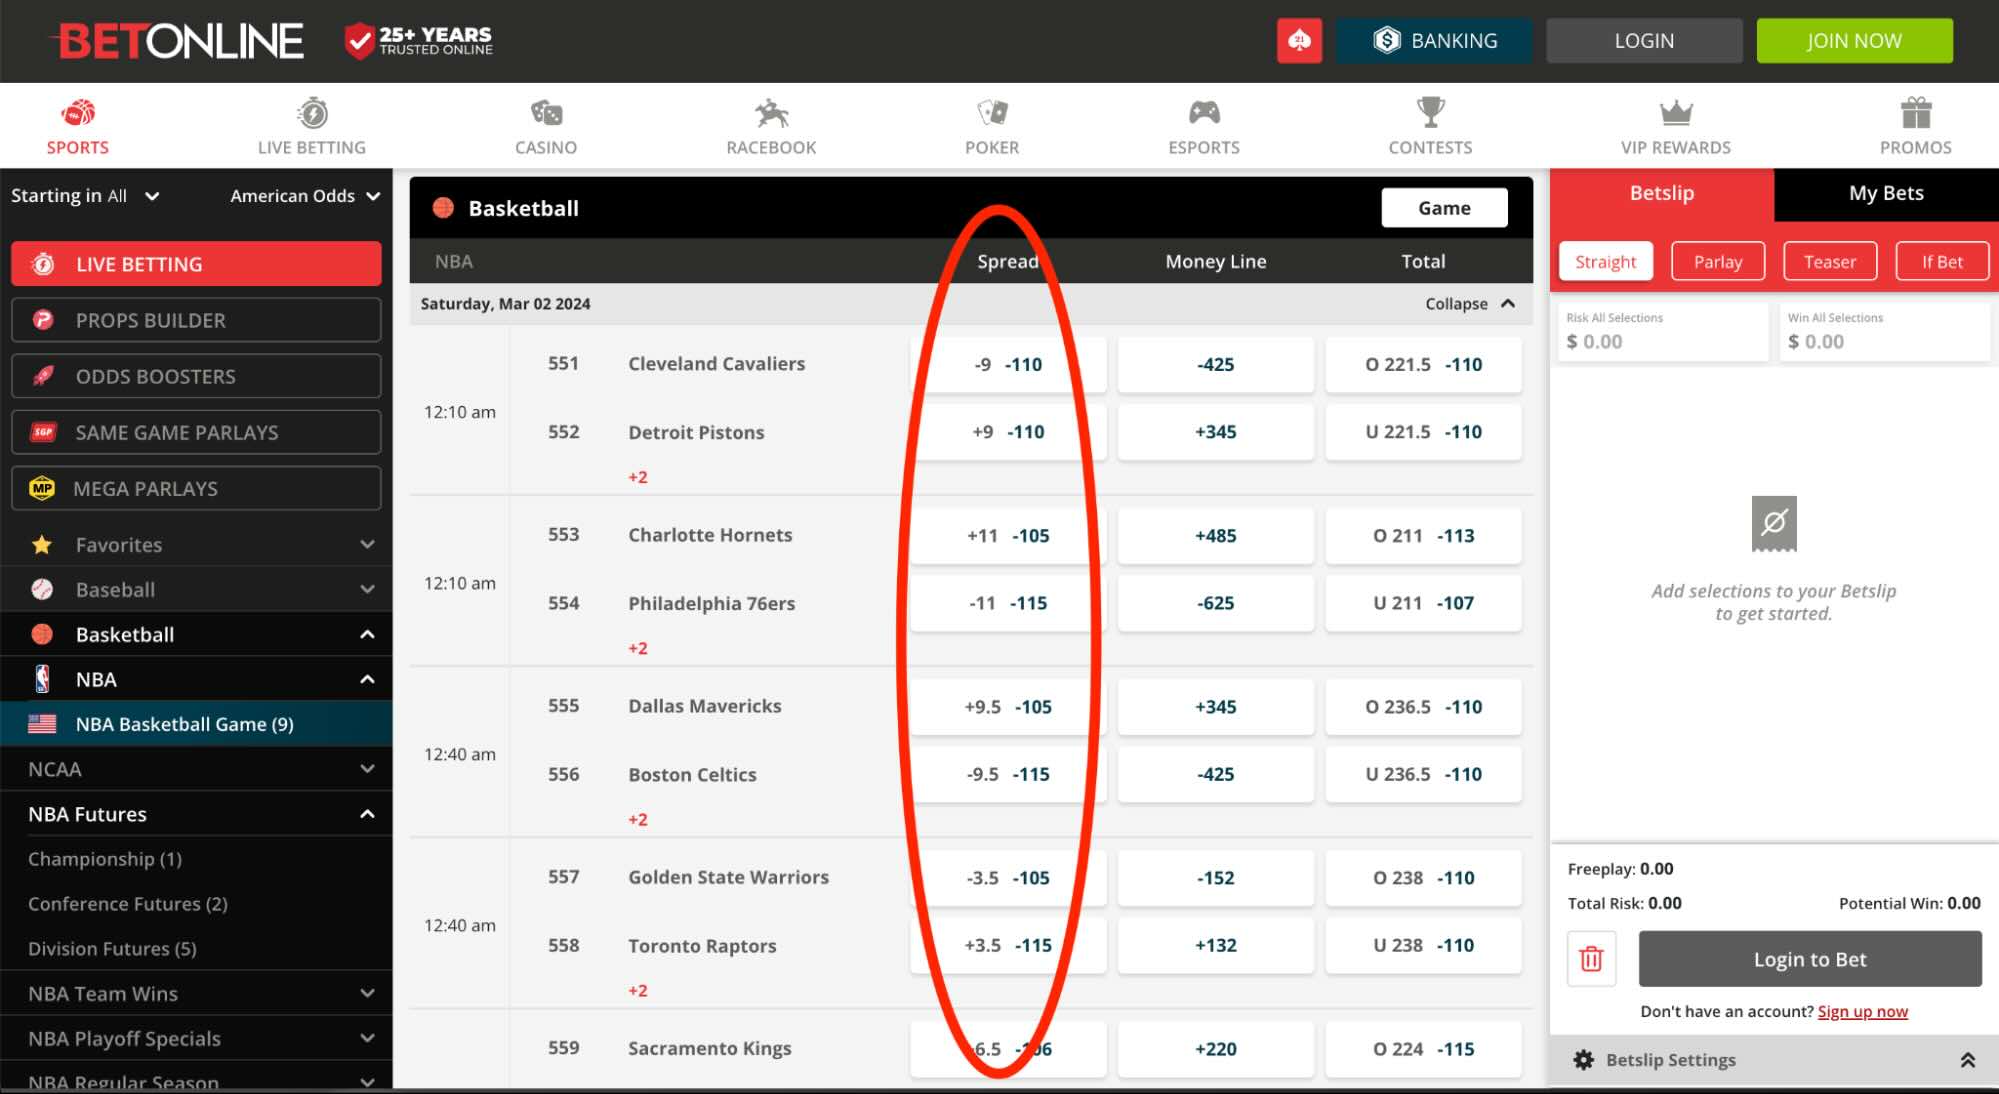 NBA matches listed in the sportsbook at BetOnline